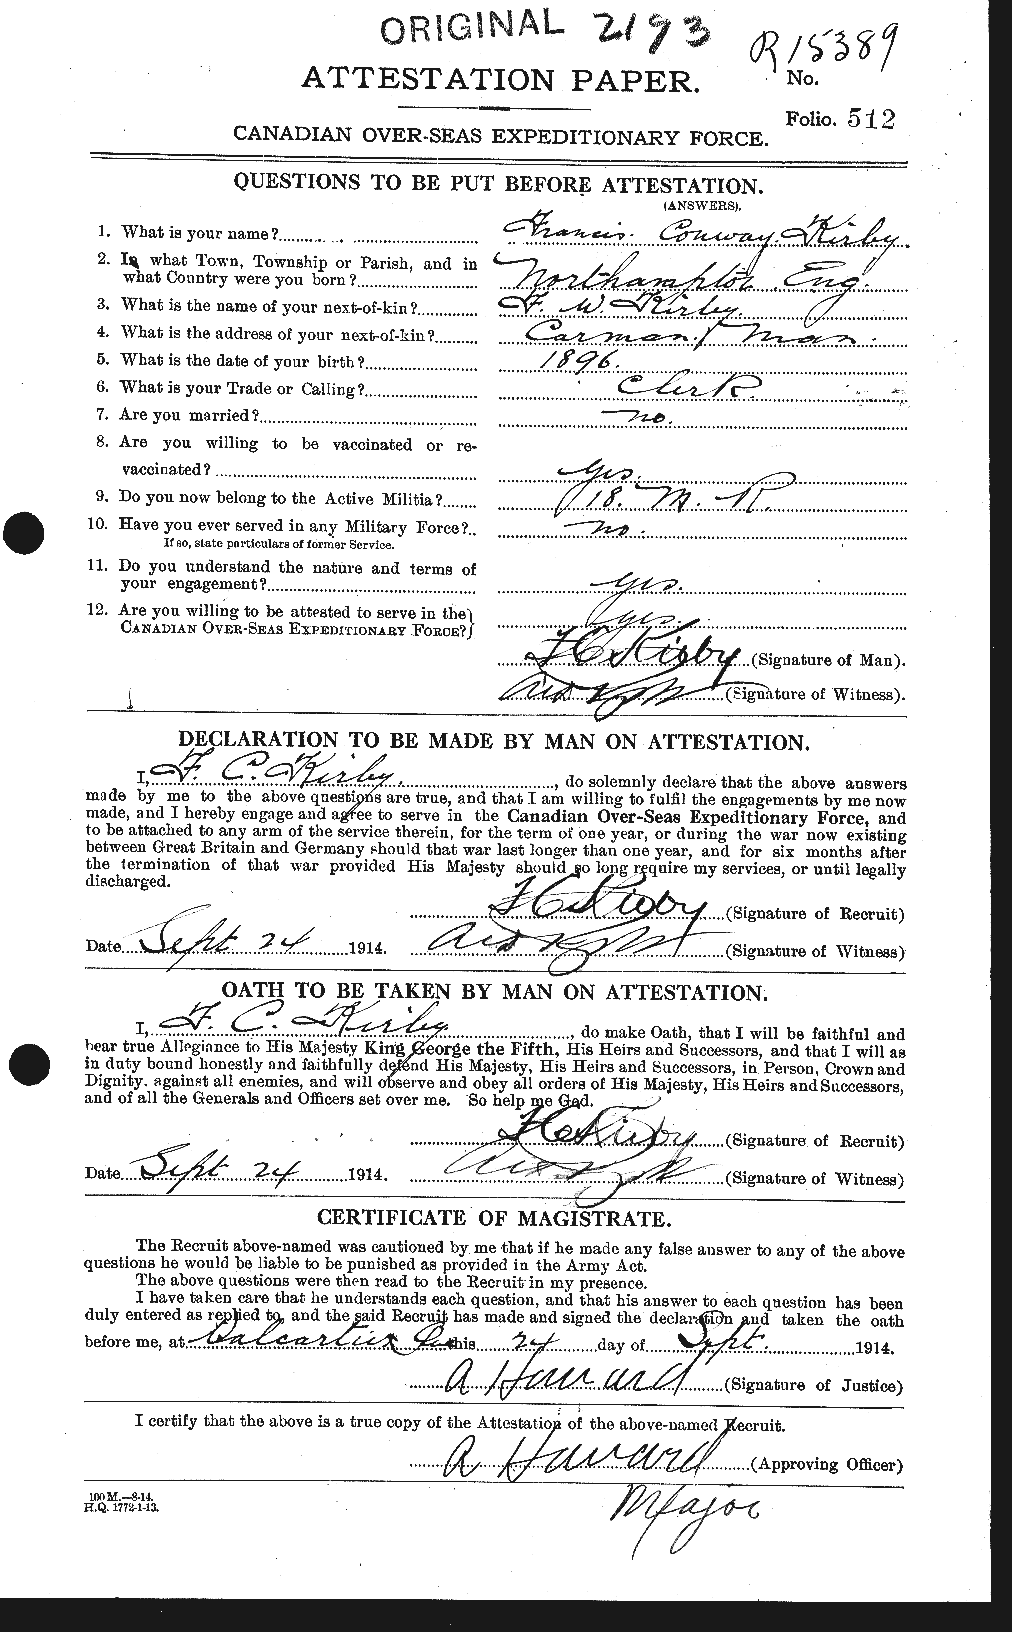 Personnel Records of the First World War - CEF 437180a